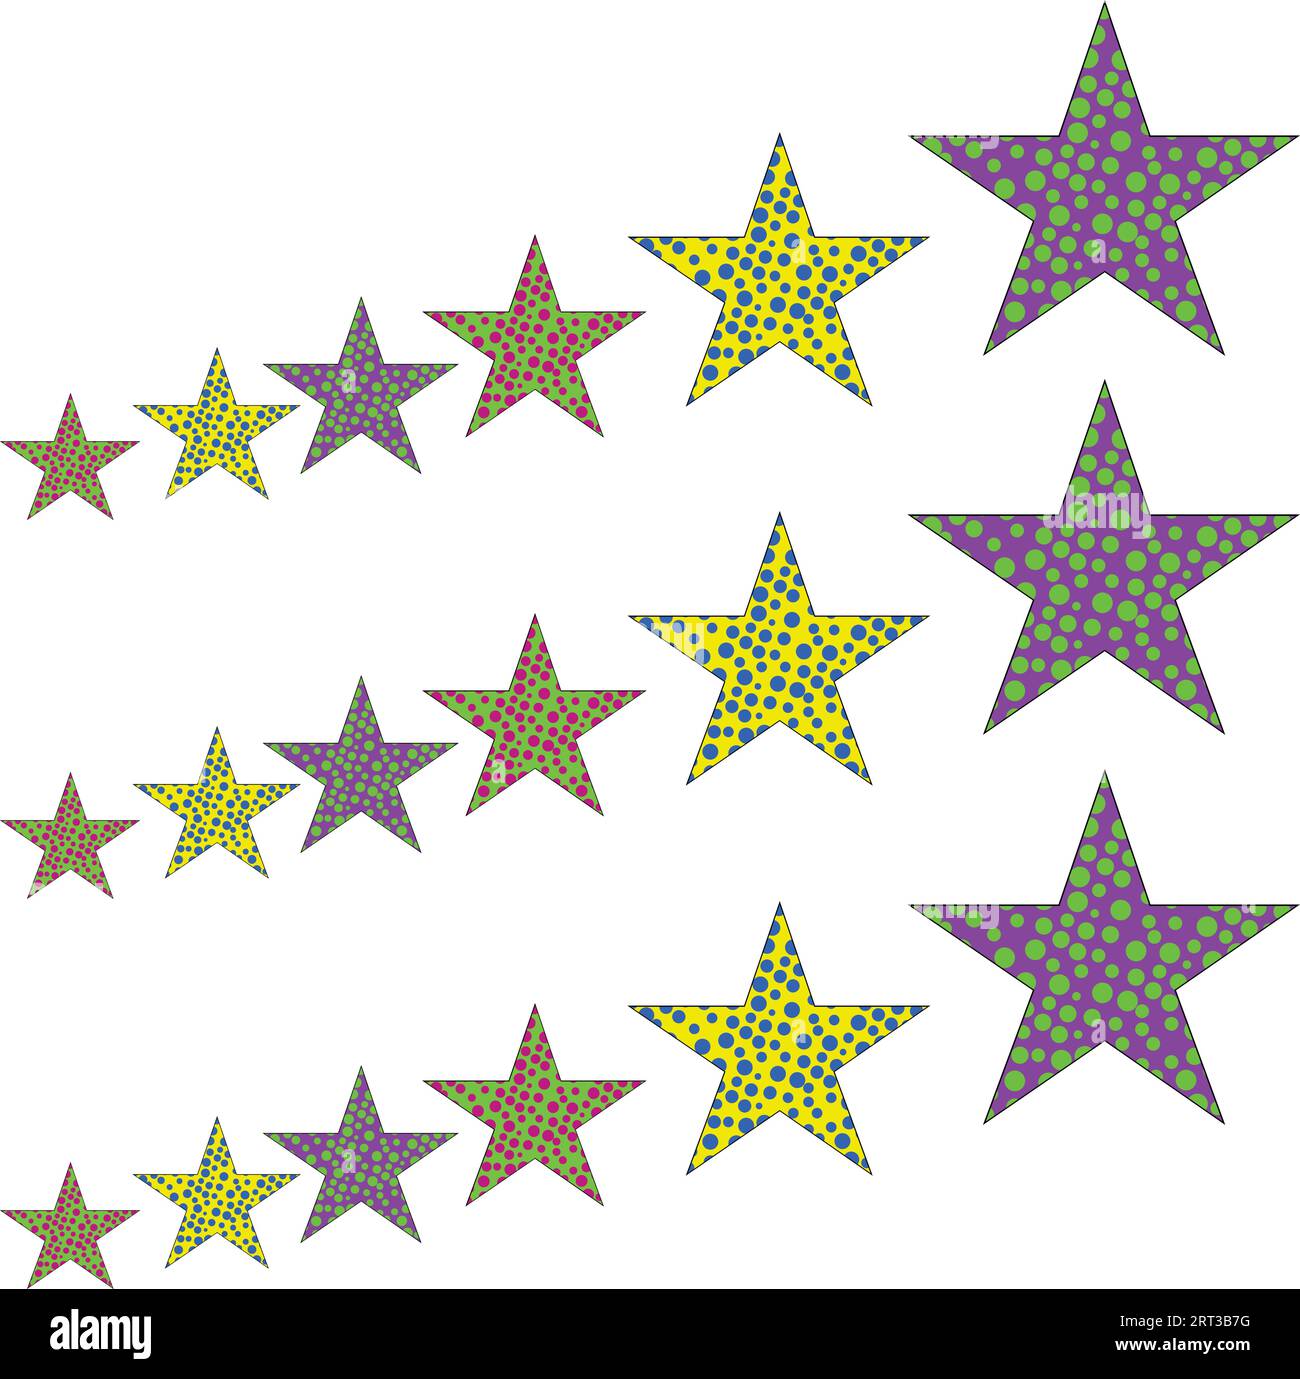 Diffrent stars set: black color assets for Christmas stars, festival celebrations, web or game design, and app icons.Vector basic shapes. retro stars. Stock Vector